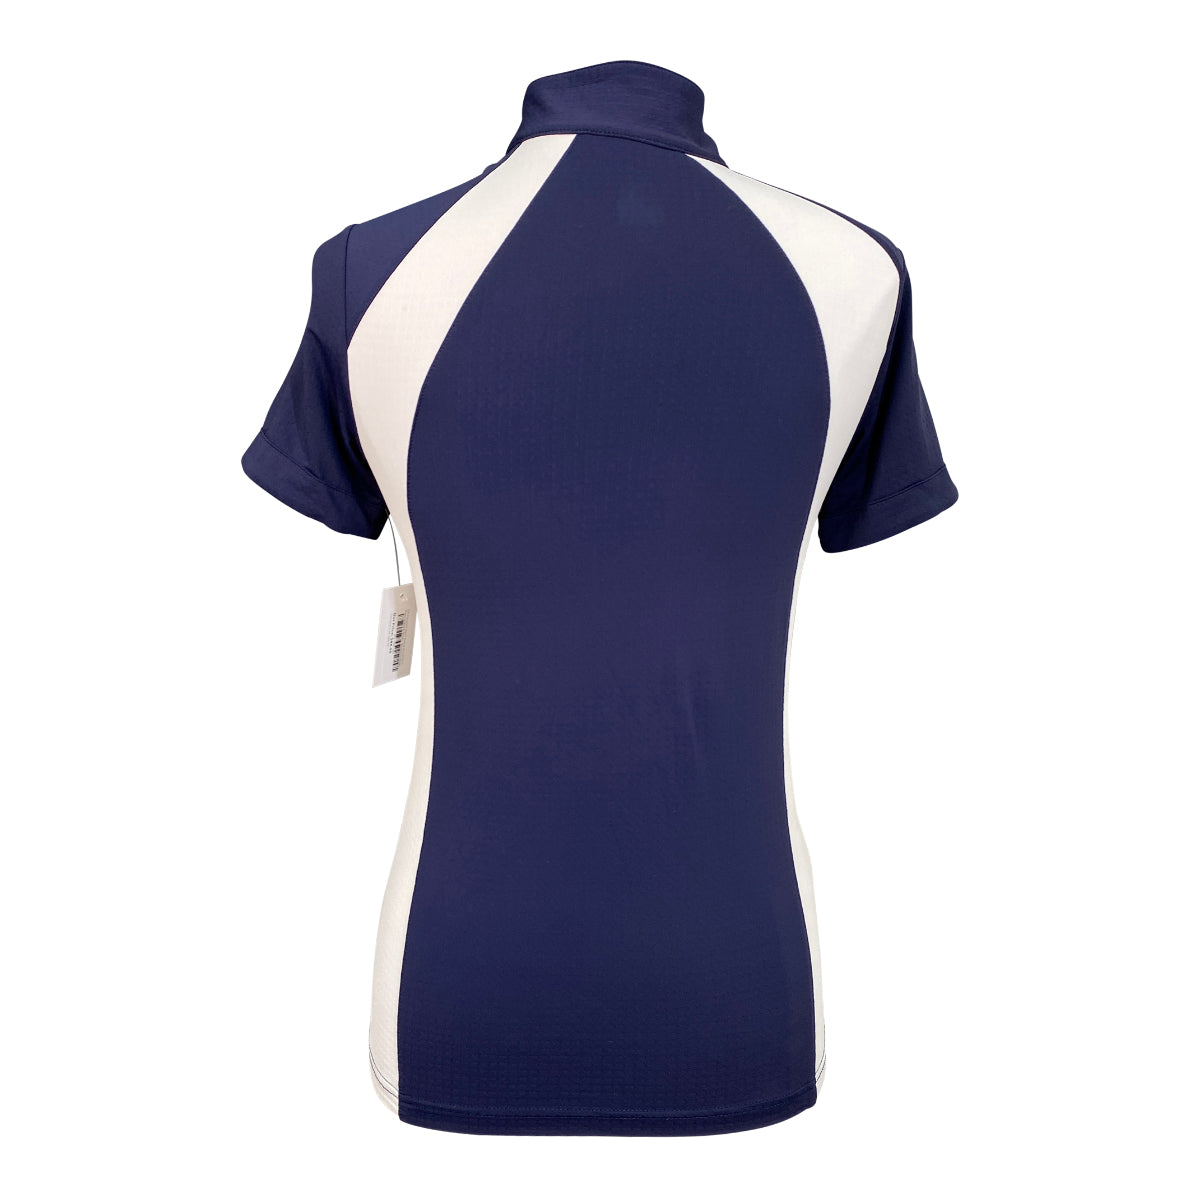 EIS Paneled Short Sleeve Sunshirt in Navy w/Red & White - Women's Smal –  The Tried Equestrian